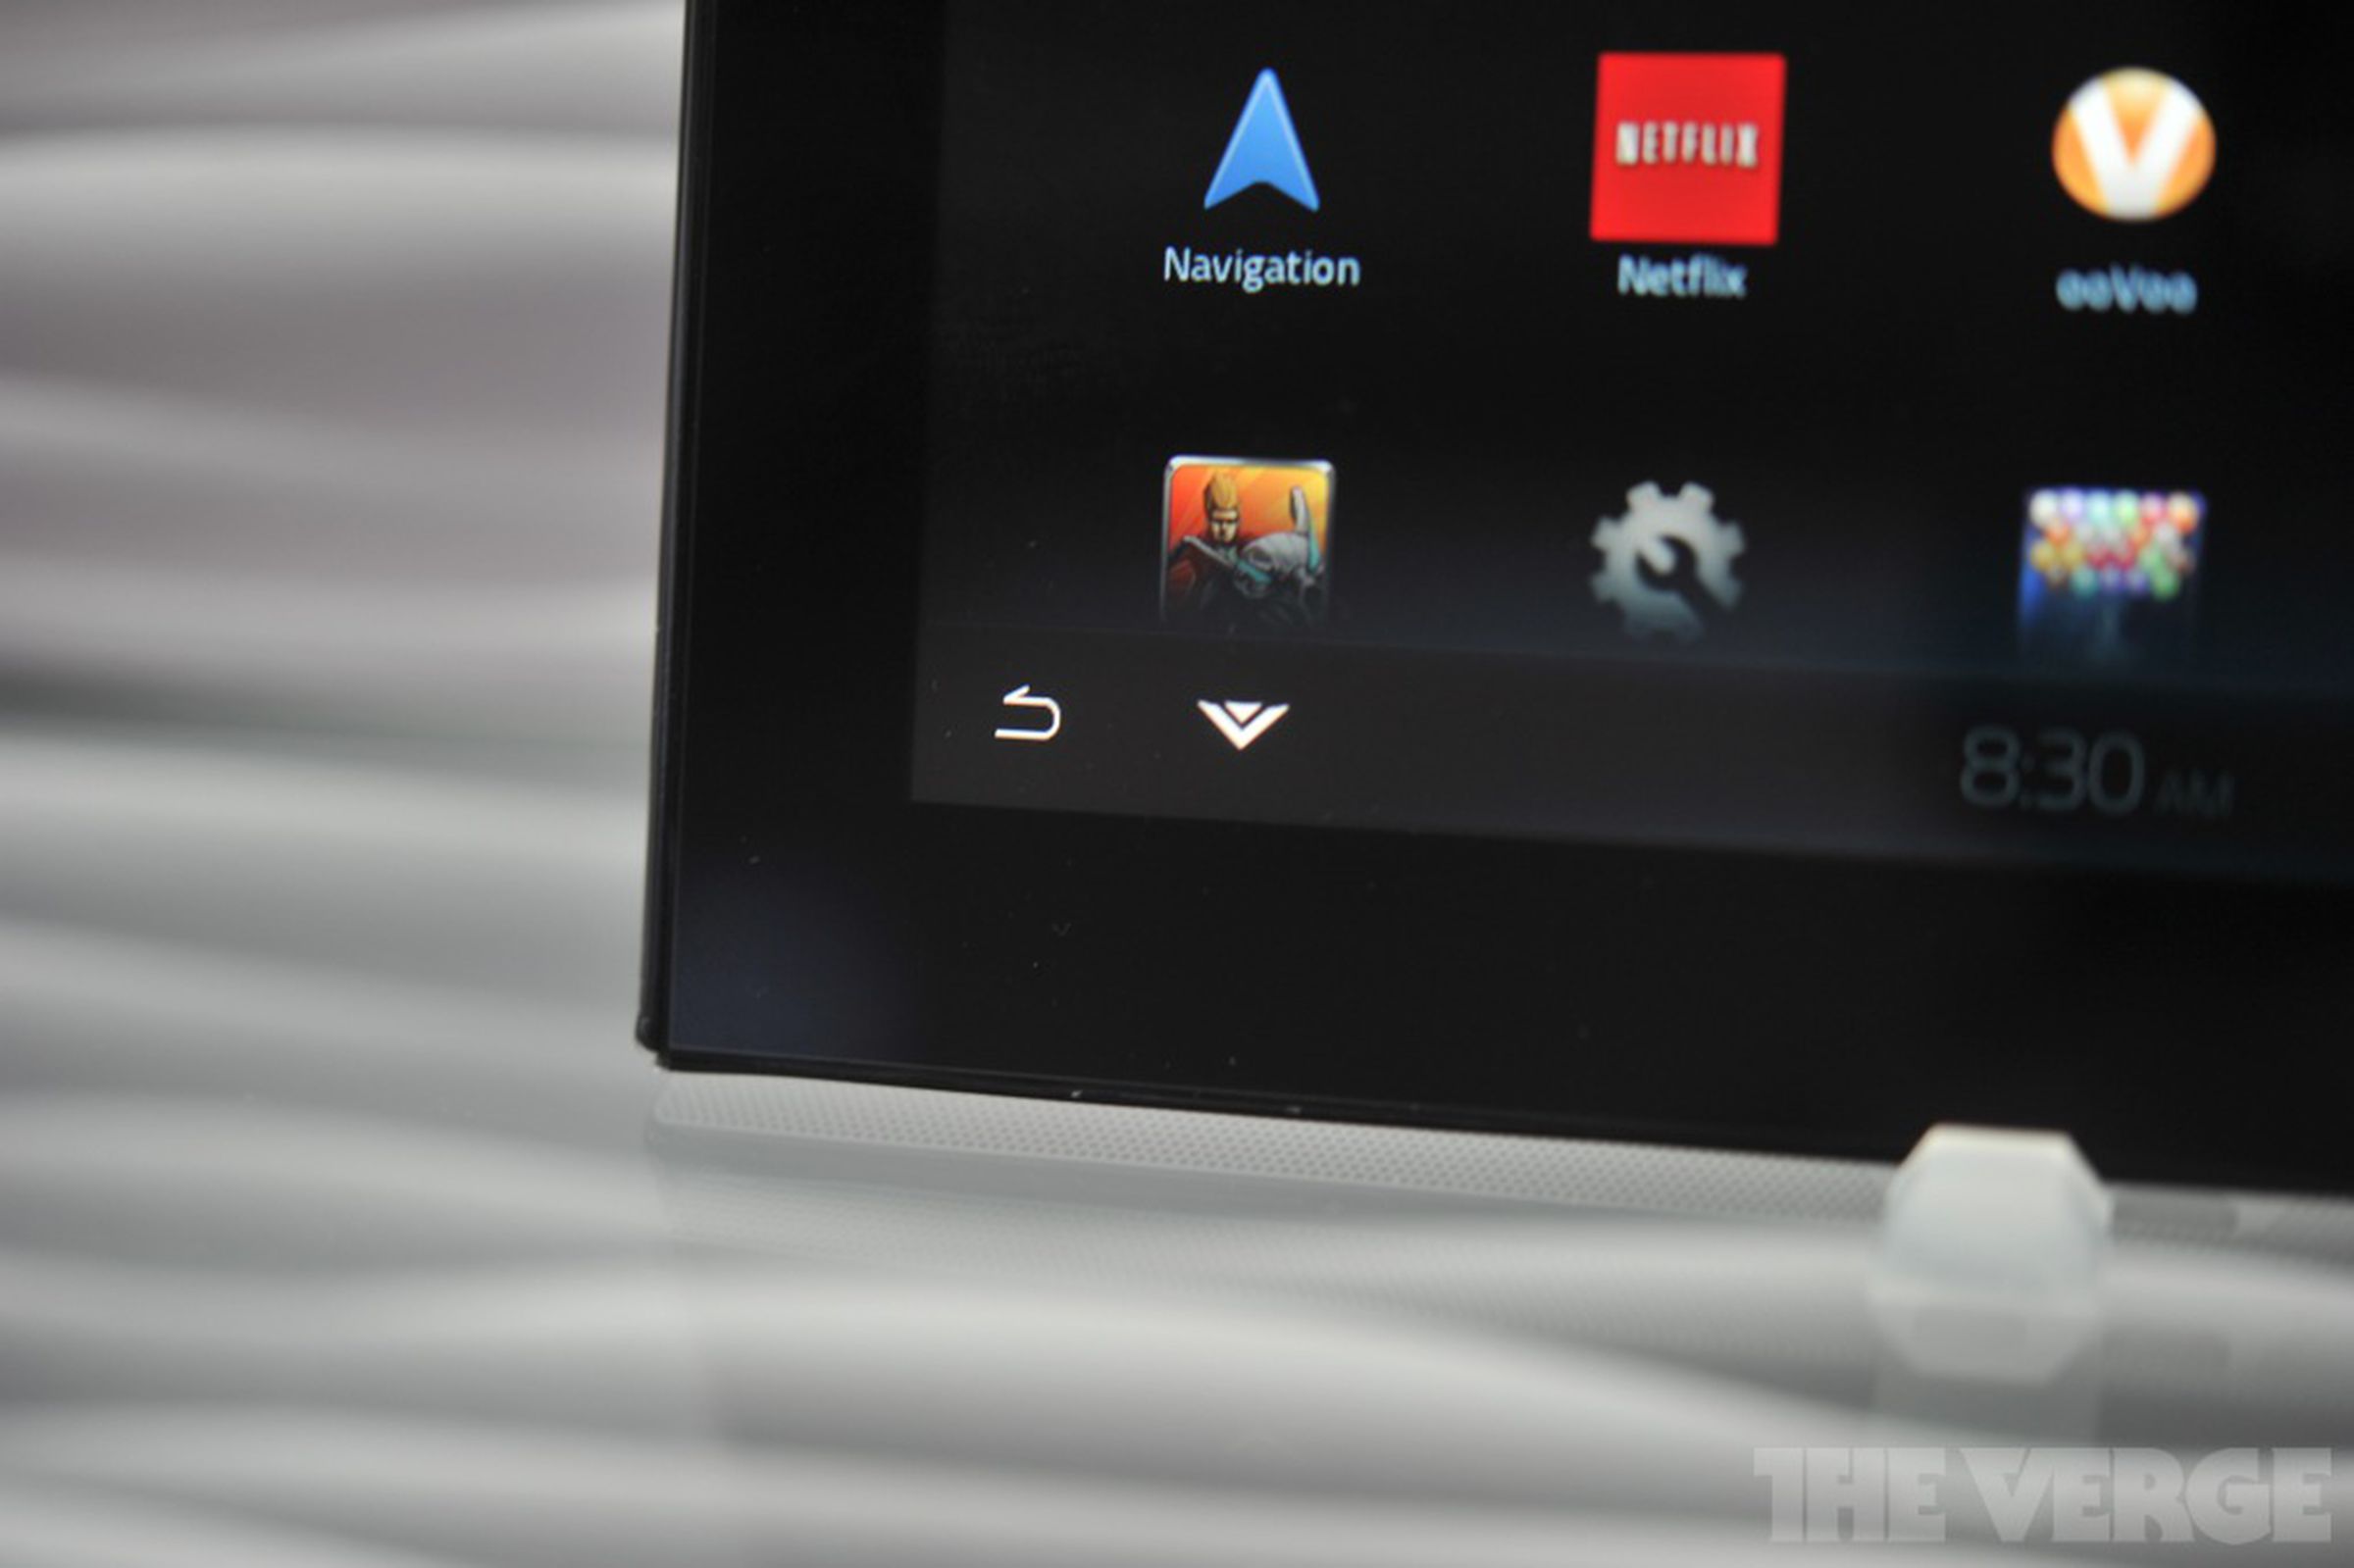 Vizio M-Series tablet first hands-on!